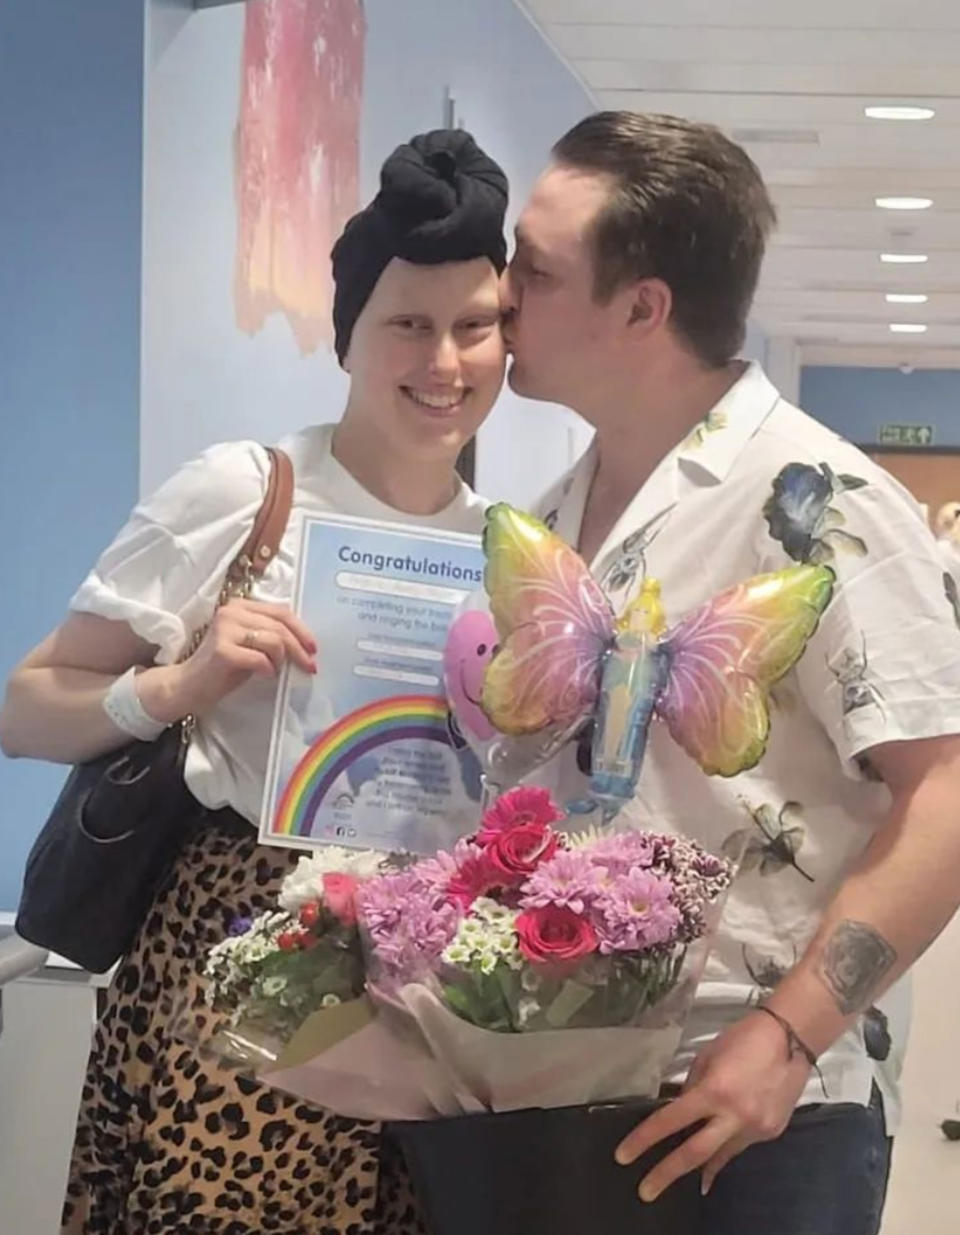 Hardy Taylor and her partner Daniel. (@my_breast_cancer_journey_/Caters)